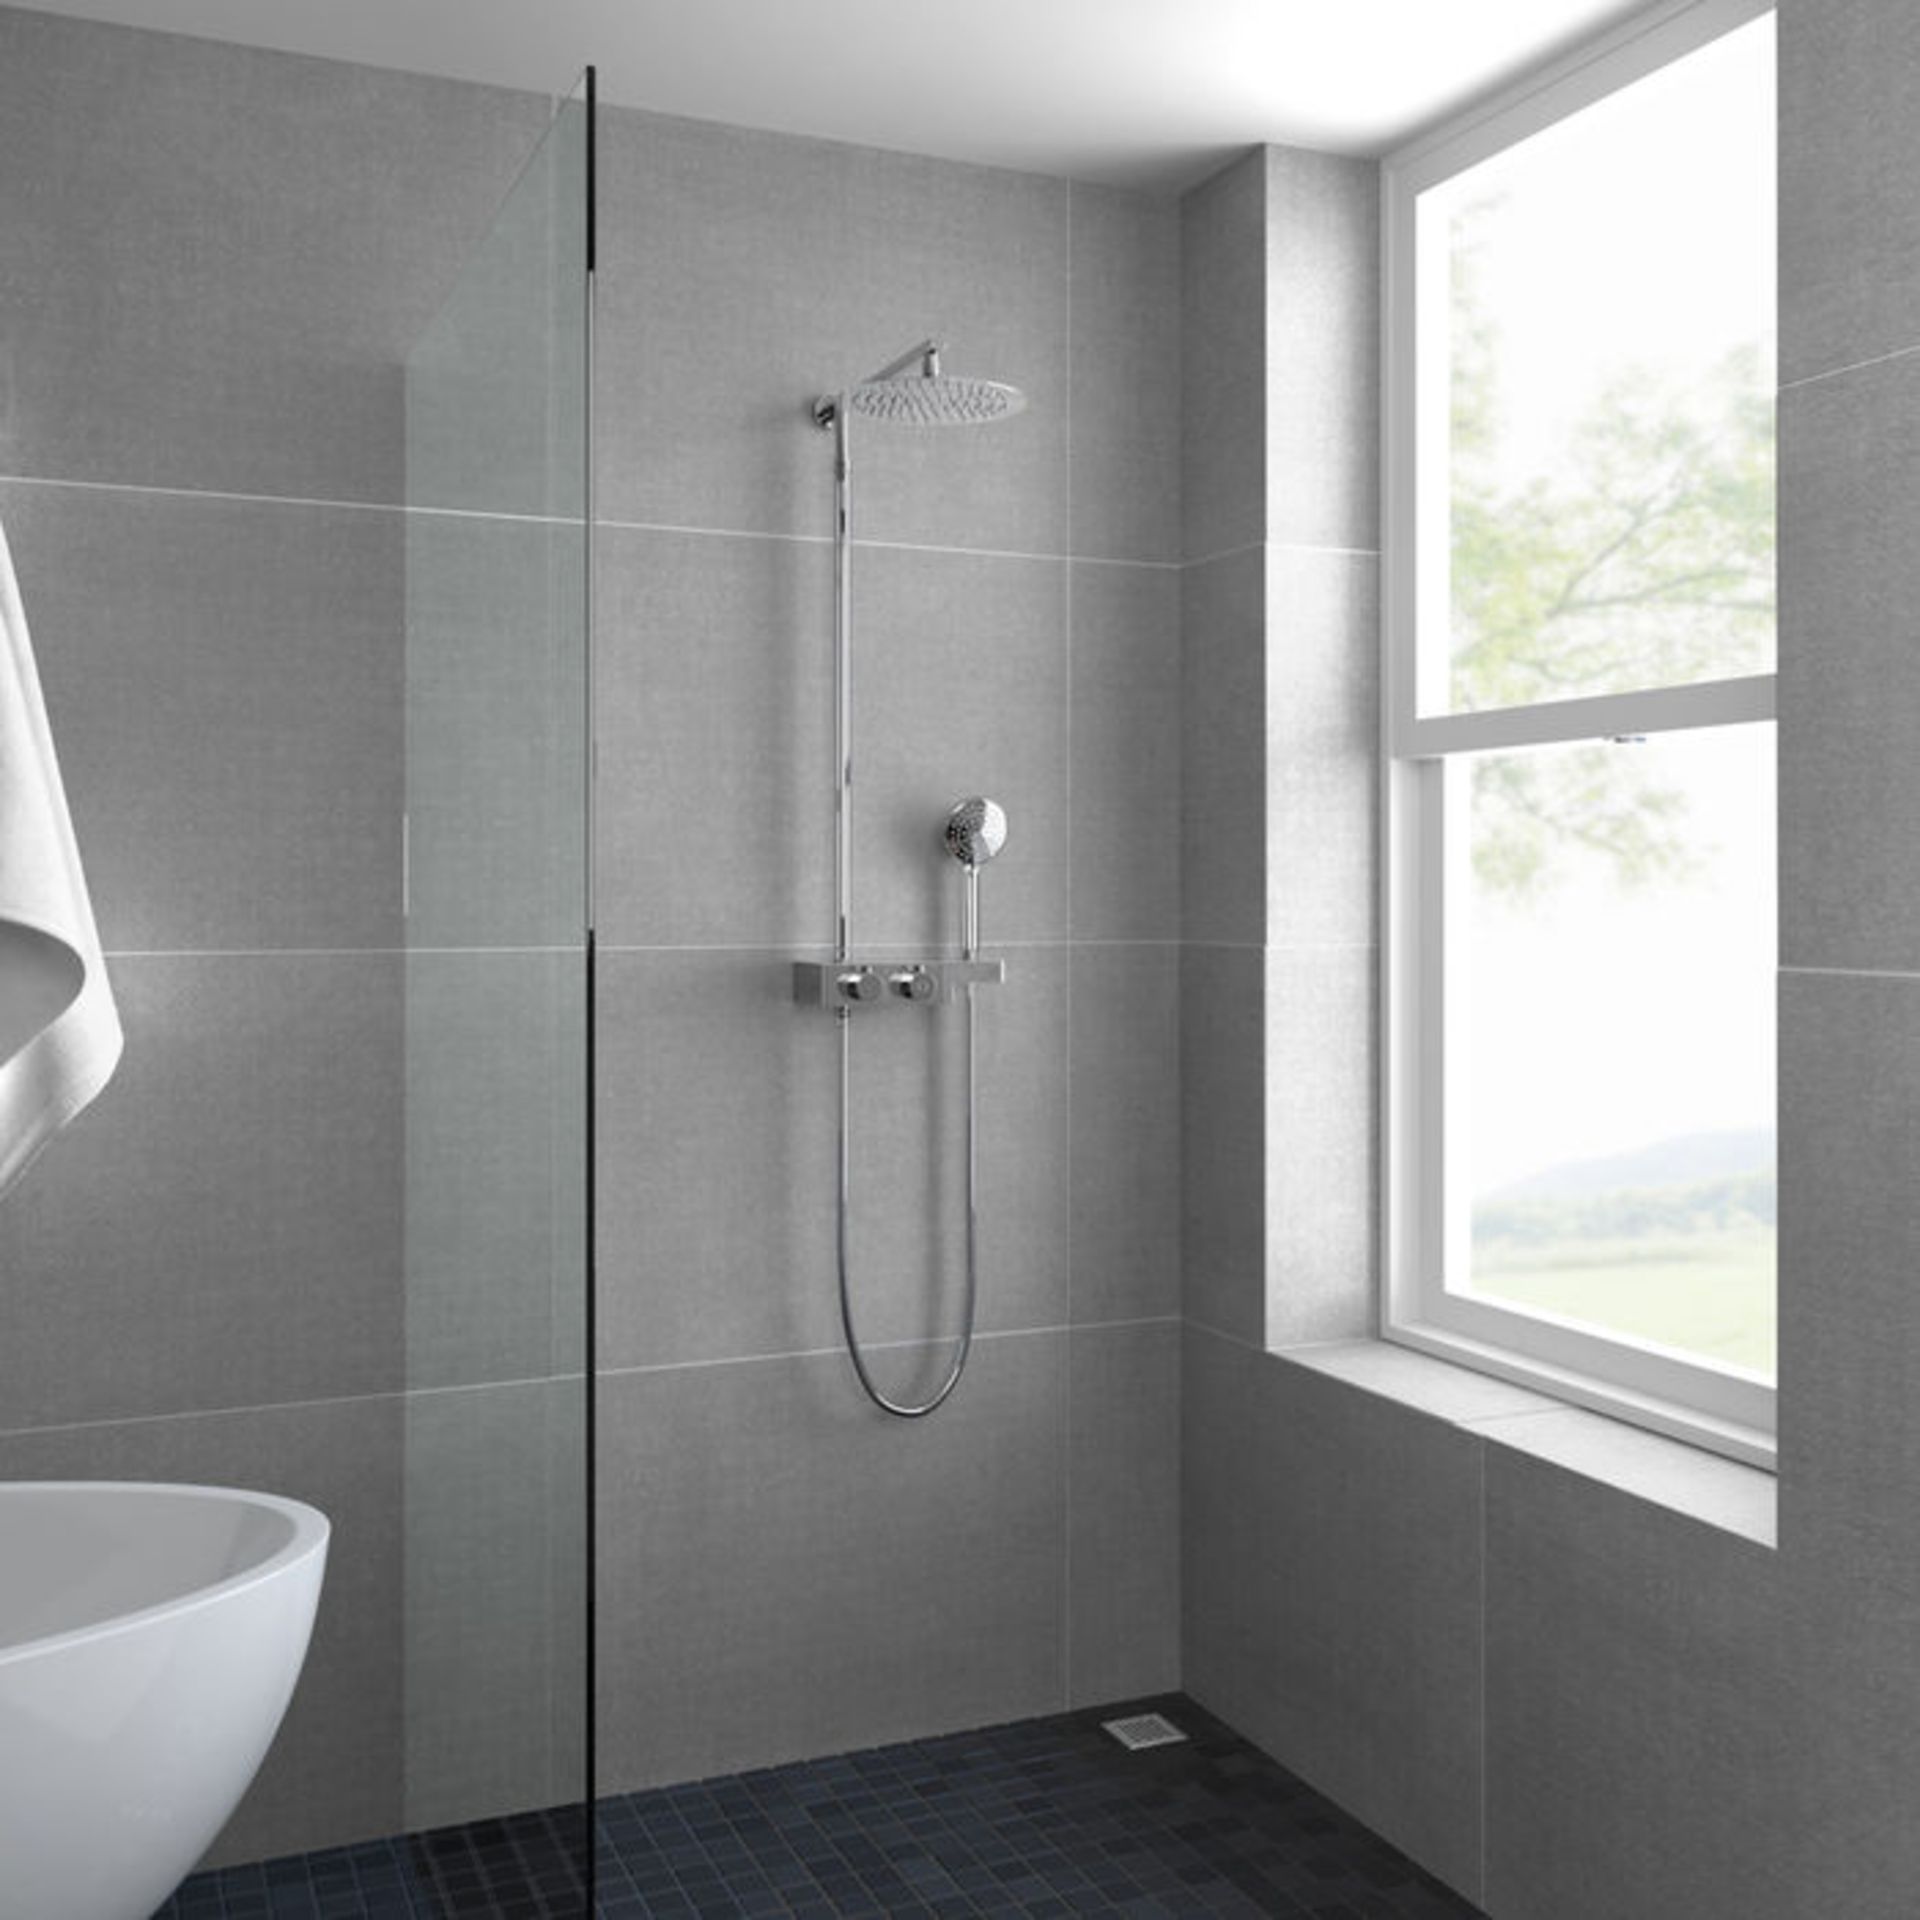 (H214) Round Exposed Thermostatic Mixer Shower Kit & Large Head. Cool to touch shower for additional - Image 3 of 6